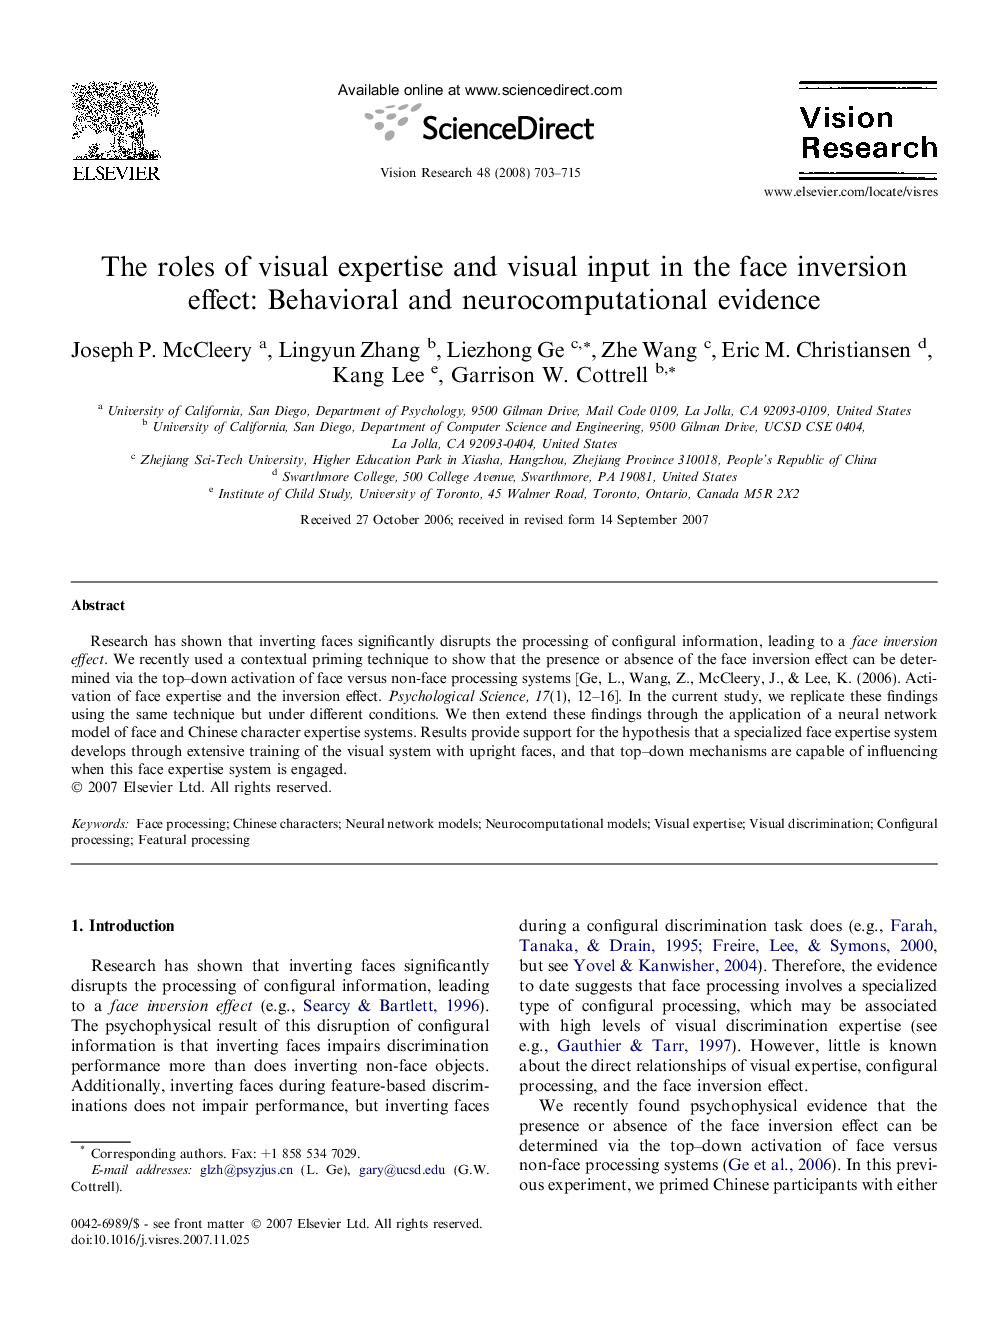 The roles of visual expertise and visual input in the face inversion effect: Behavioral and neurocomputational evidence